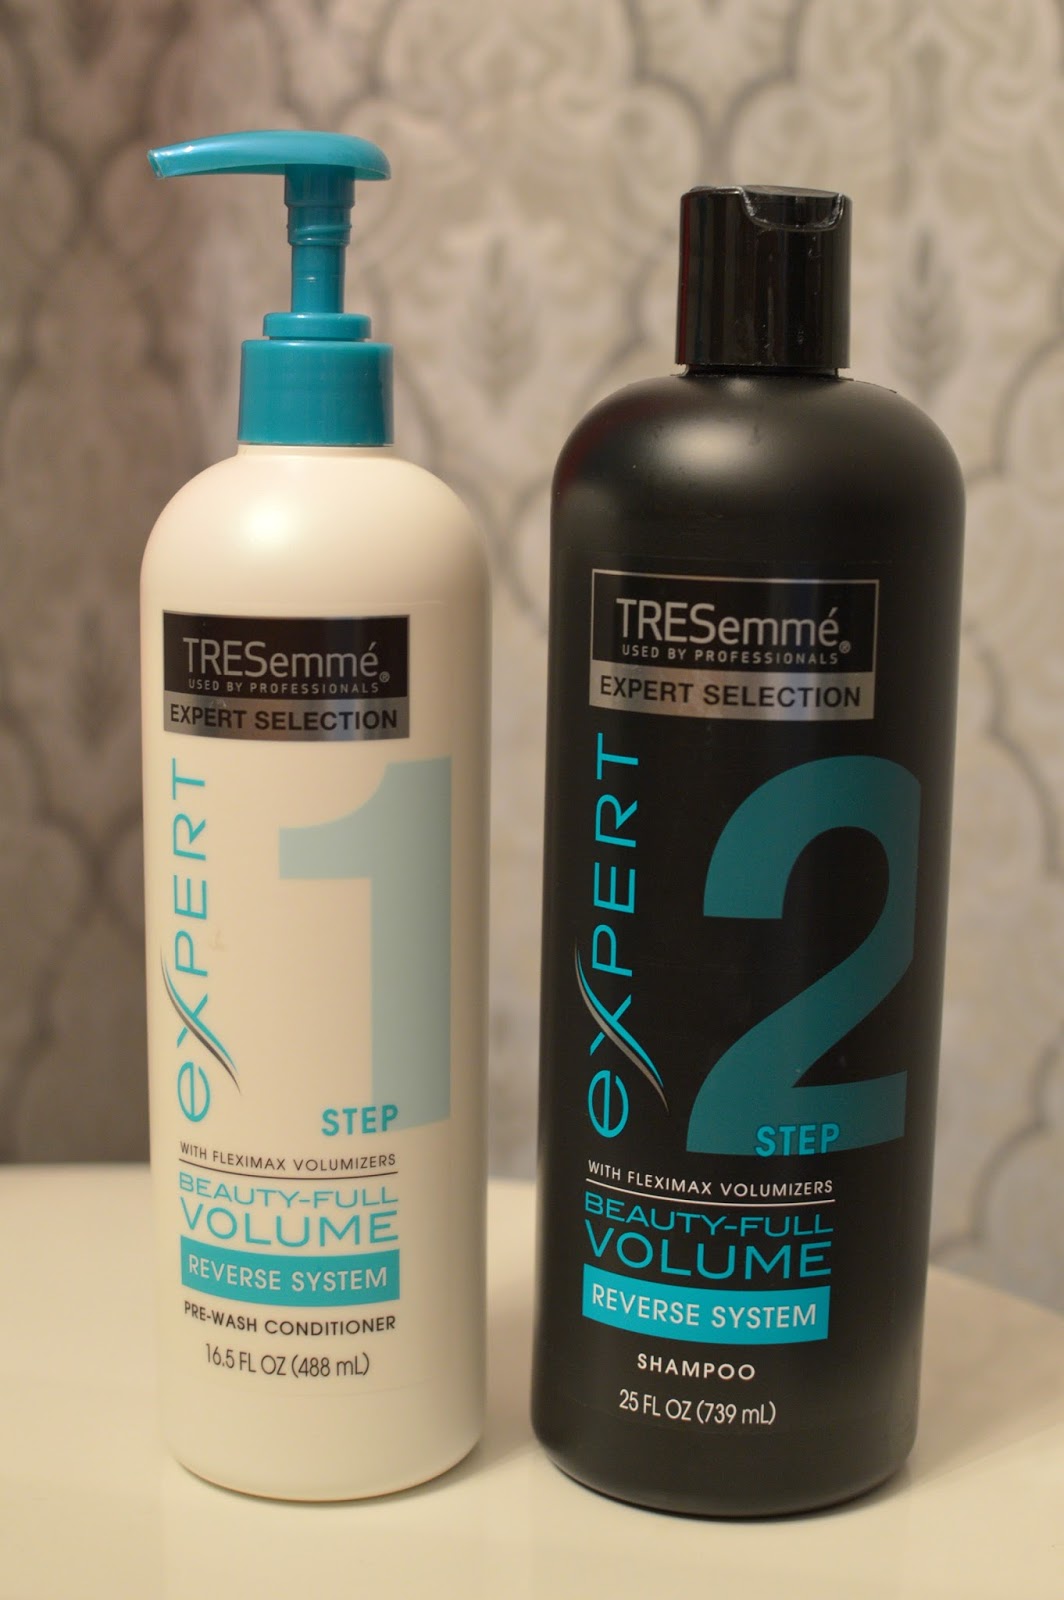 TRESemme Beauty-Full Volume Conditioner and Shampoo Review